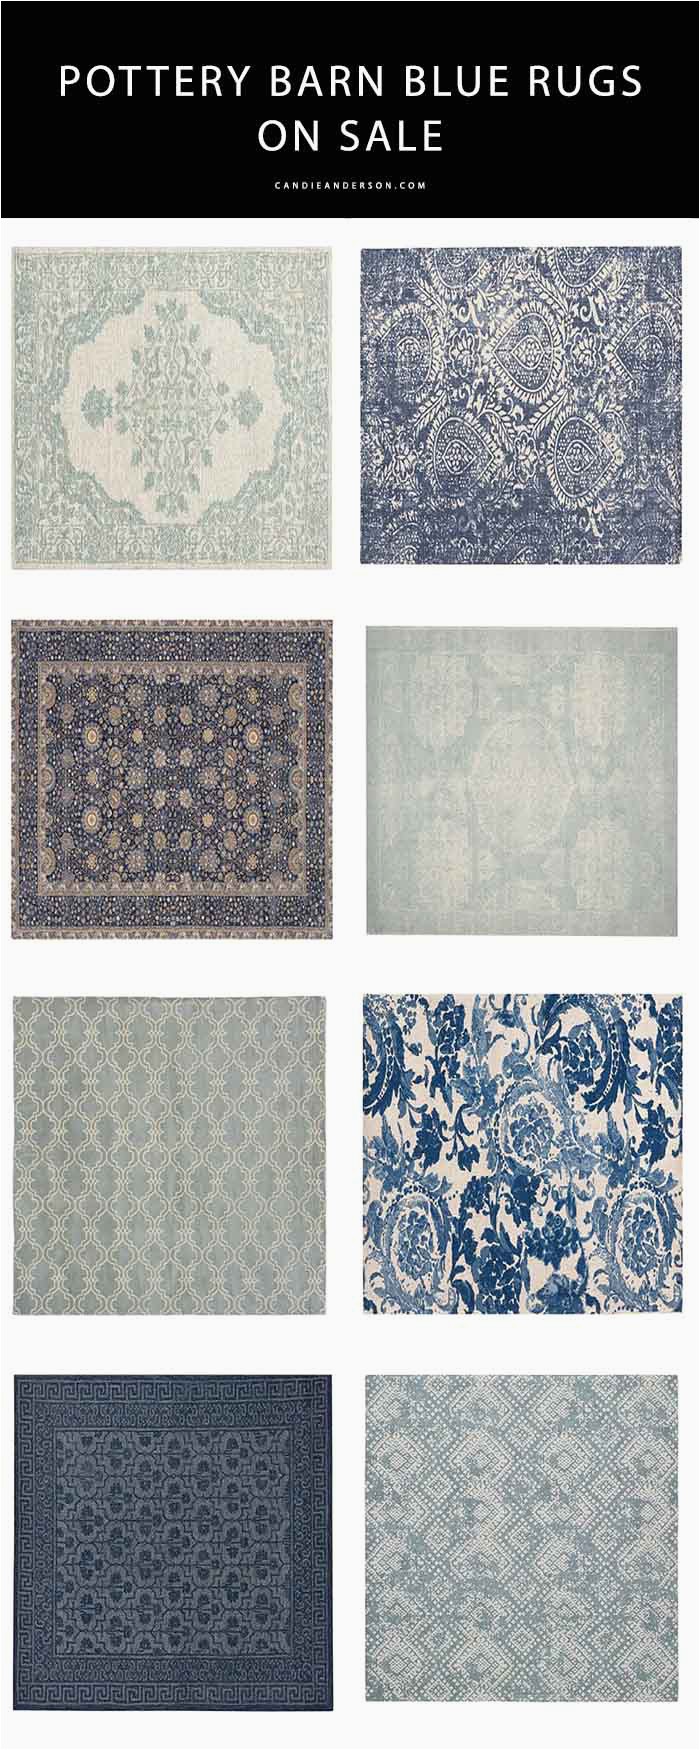 blue pottery barn rugs sale can anderson can anderson home decor collage trends elegant timeless